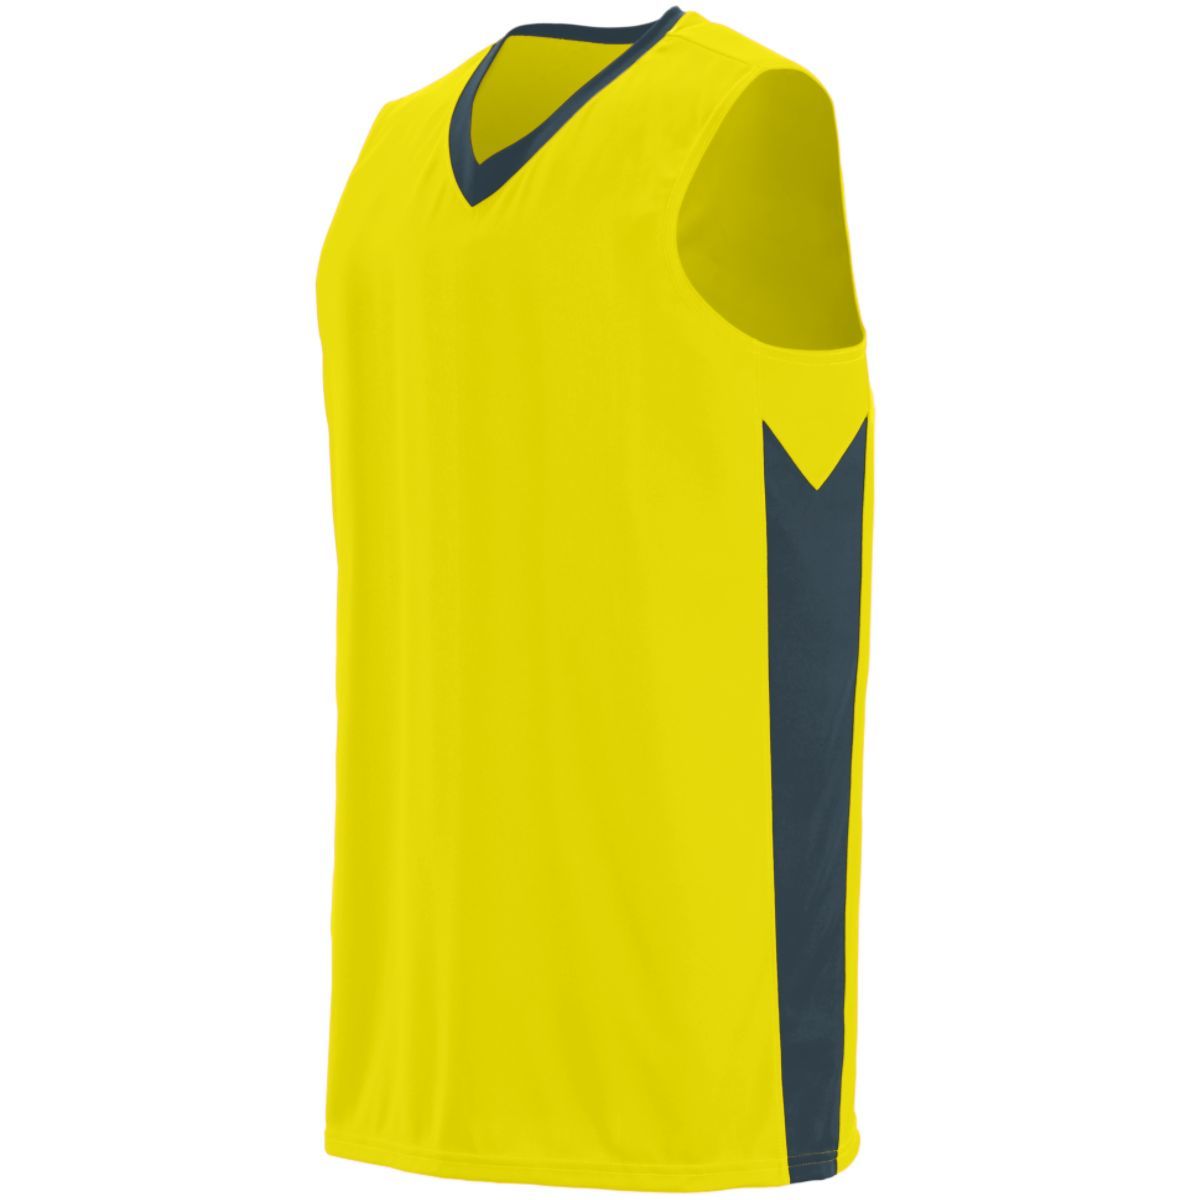 Augusta Sportswear Block Out Jersey in Power Yellow/Slate  -Part of the Adult, Adult-Jersey, Augusta-Products, Basketball, Shirts, All-Sports, All-Sports-1 product lines at KanaleyCreations.com